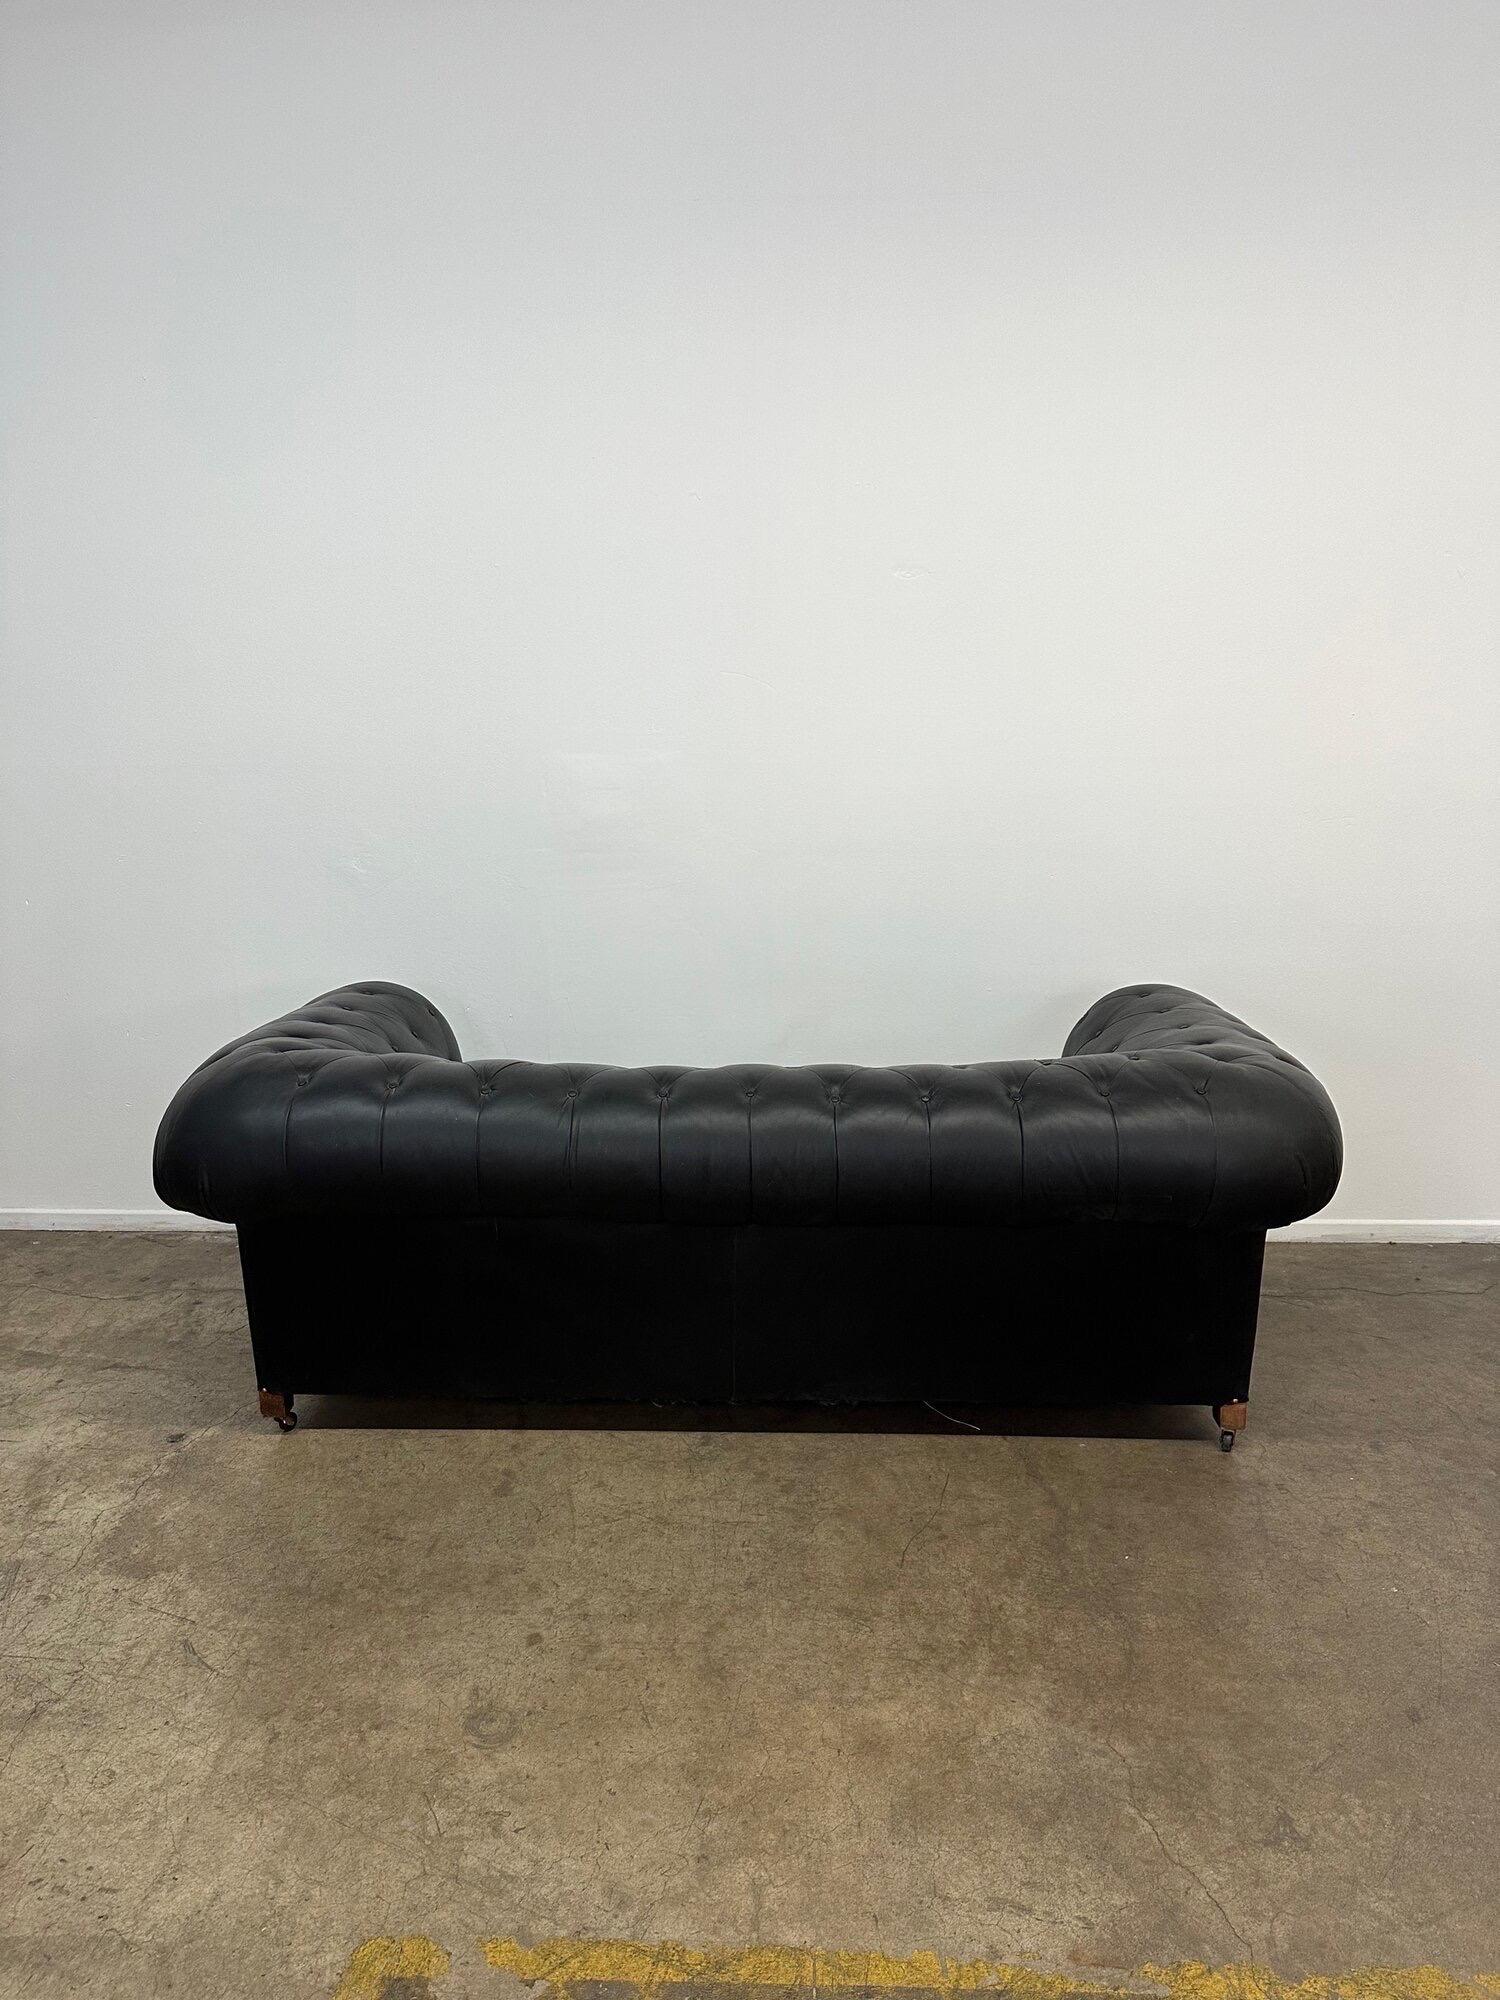 Late 20th Century Vintage Leather Chesterfield Sofa